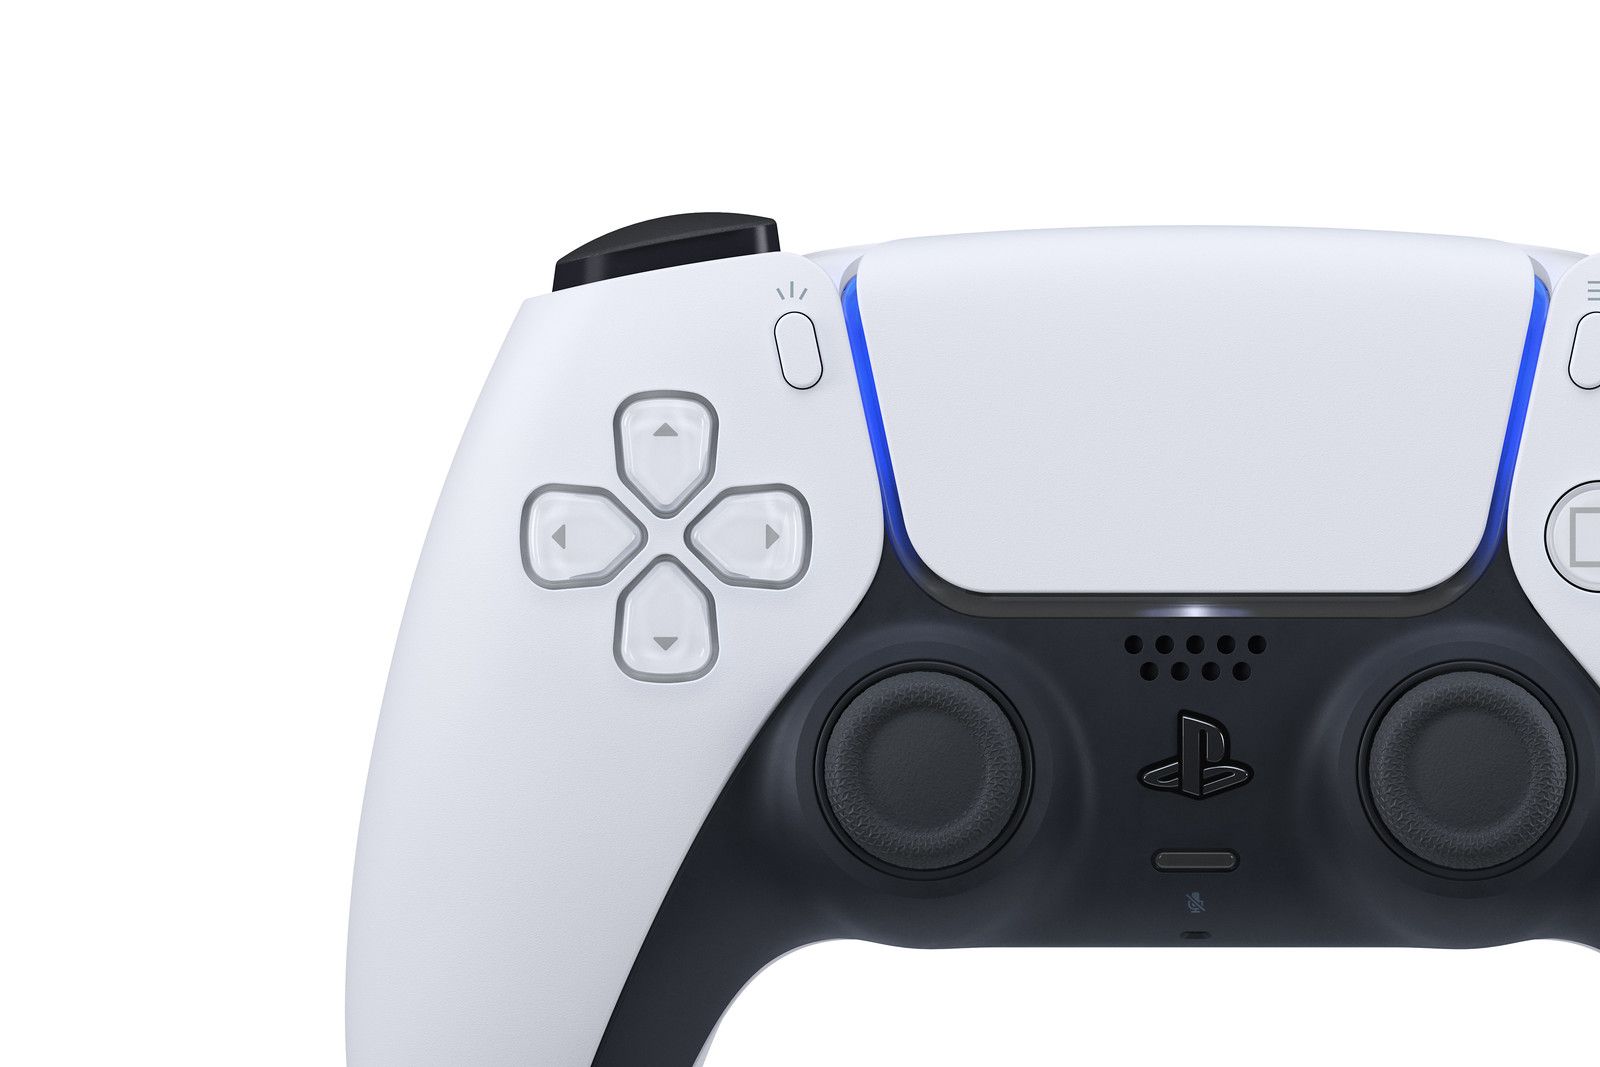 Introducing DualSense, the New Wireless Game Controller